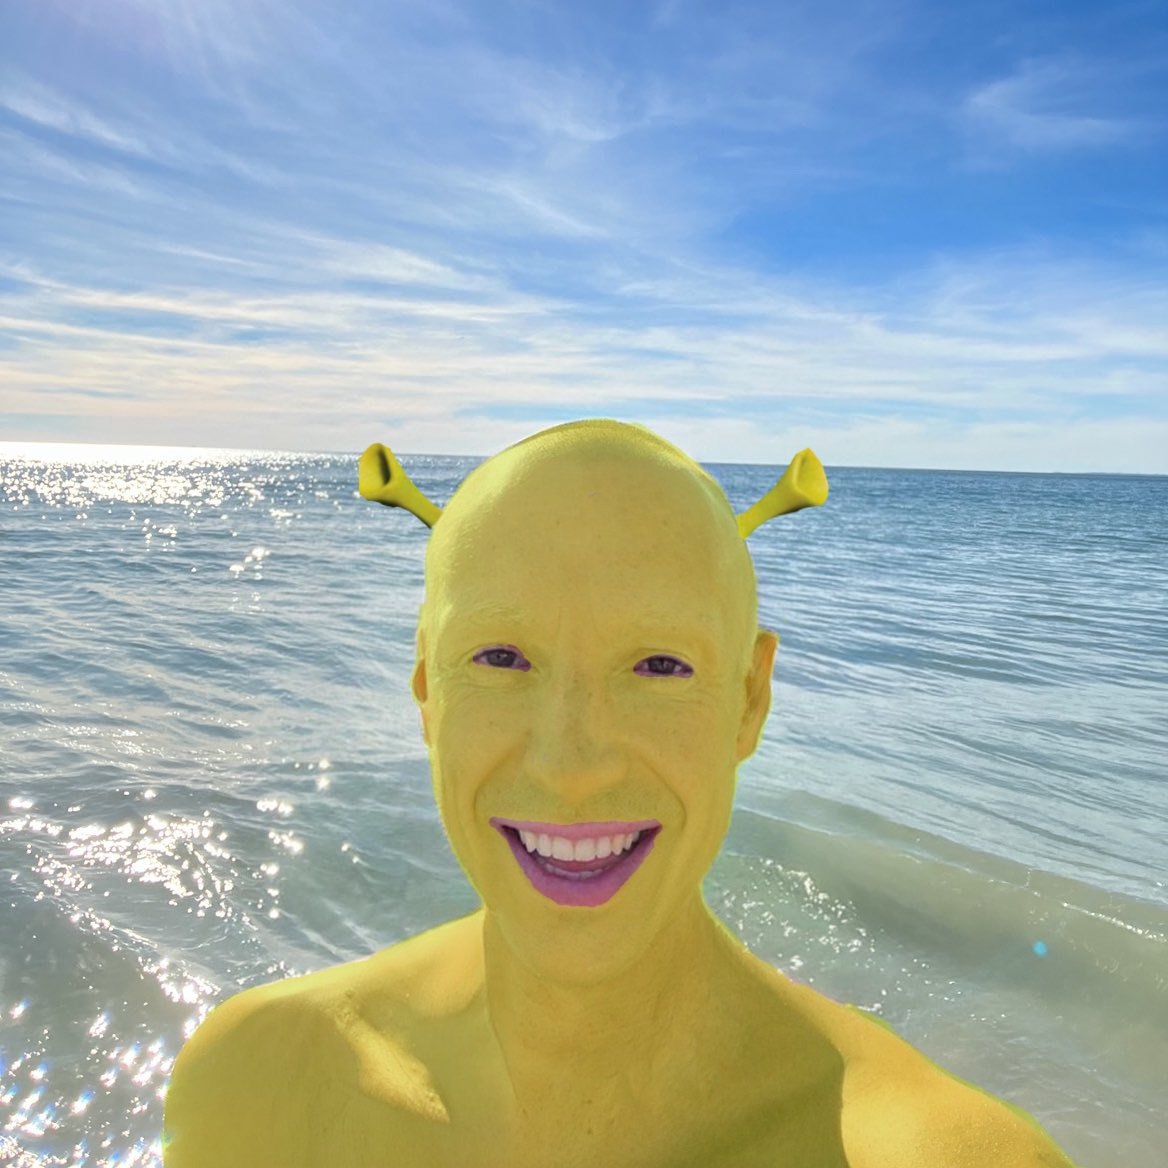 the effects of social media need to be studied bc I had a dream that someone had the fucking cocky want boing boing image as their PFP but it was like this and they said 'we've come for your shreks'